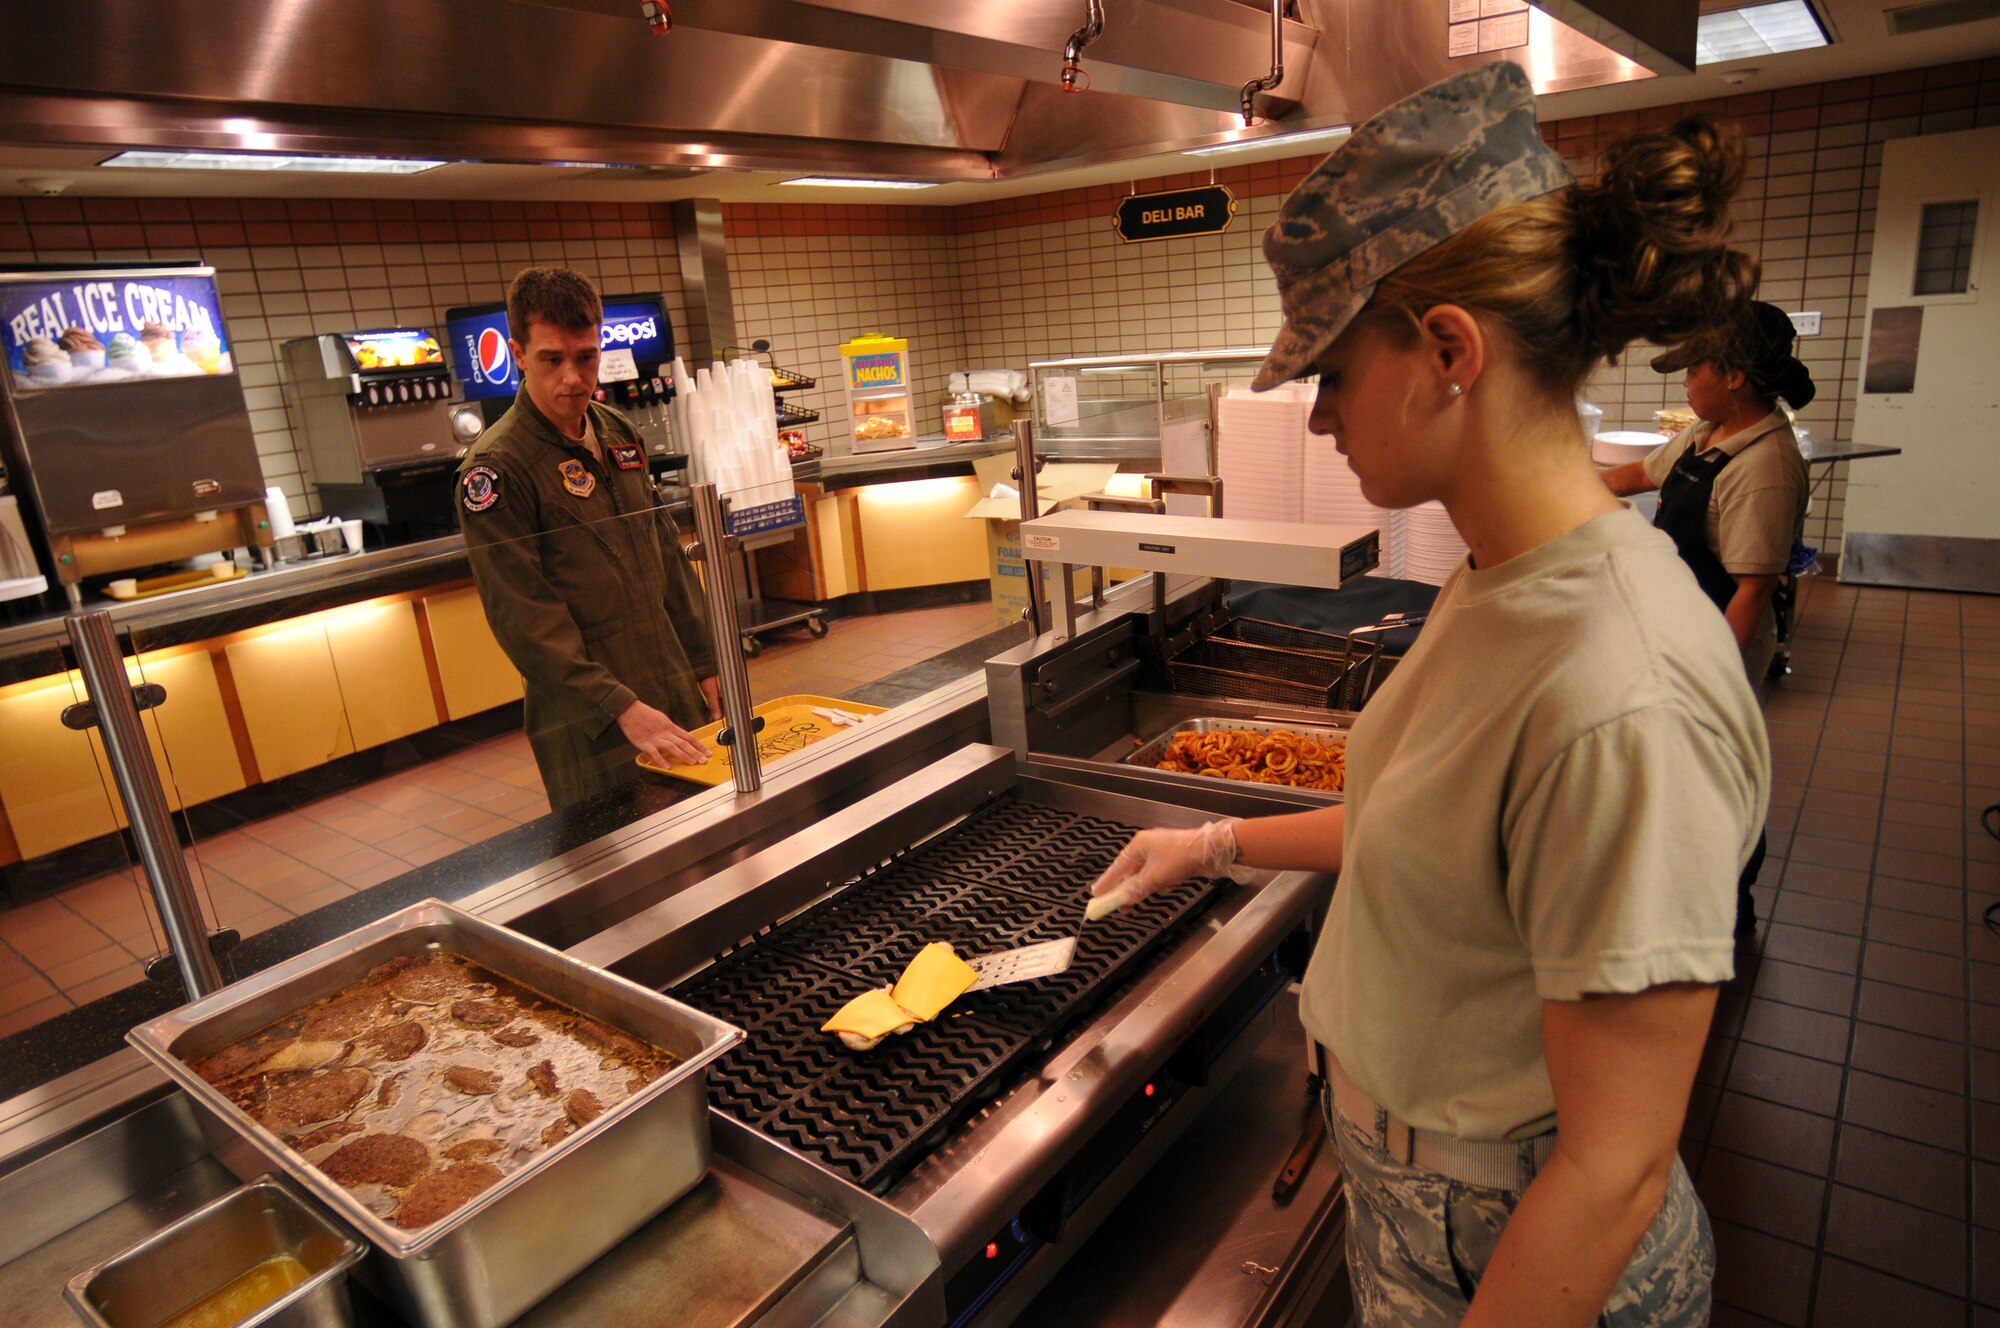 Airman 1st Class Caitlin Taylor, 115th Force Support Squadron, prepares a cheeseburger for a waiting patron at the dining facility at Eielson AFB, Alaska Aug. 18. Taylor deployed to Eielson in support of the 115th Fighter Wing out of Madison, Wis. (Wisconsin Air National Guard photo by Tech Sgt. Ashley Bell)